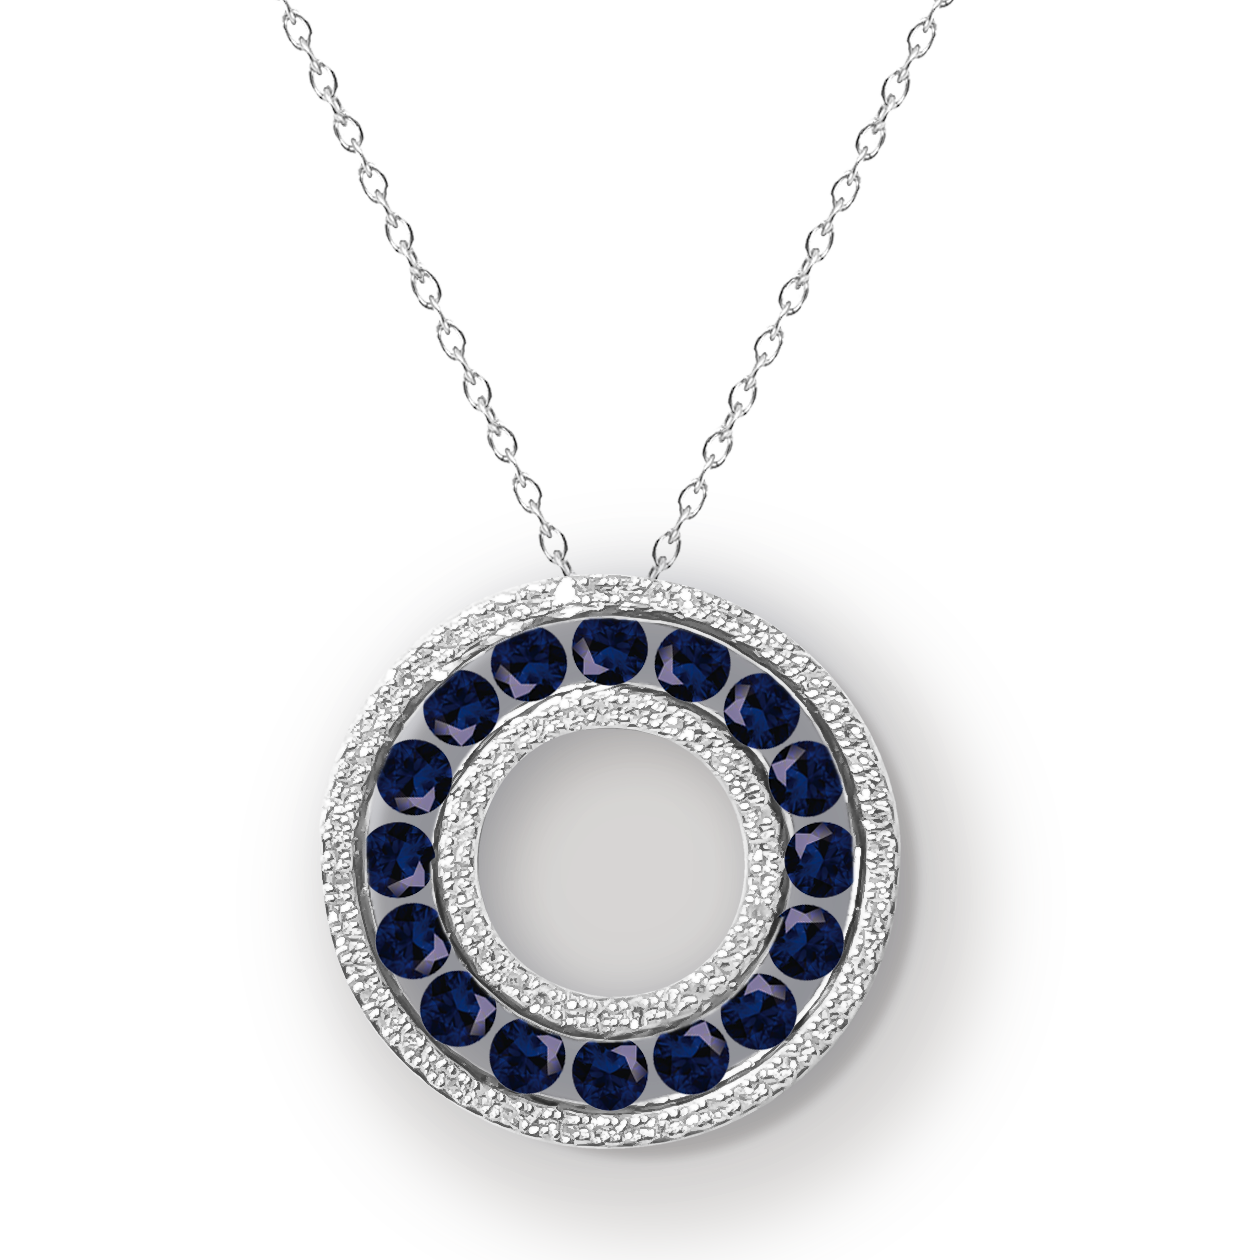 17mm Sapphire and Diamond Halo Circle of Life Pendant in 9ct White Gold on Chain